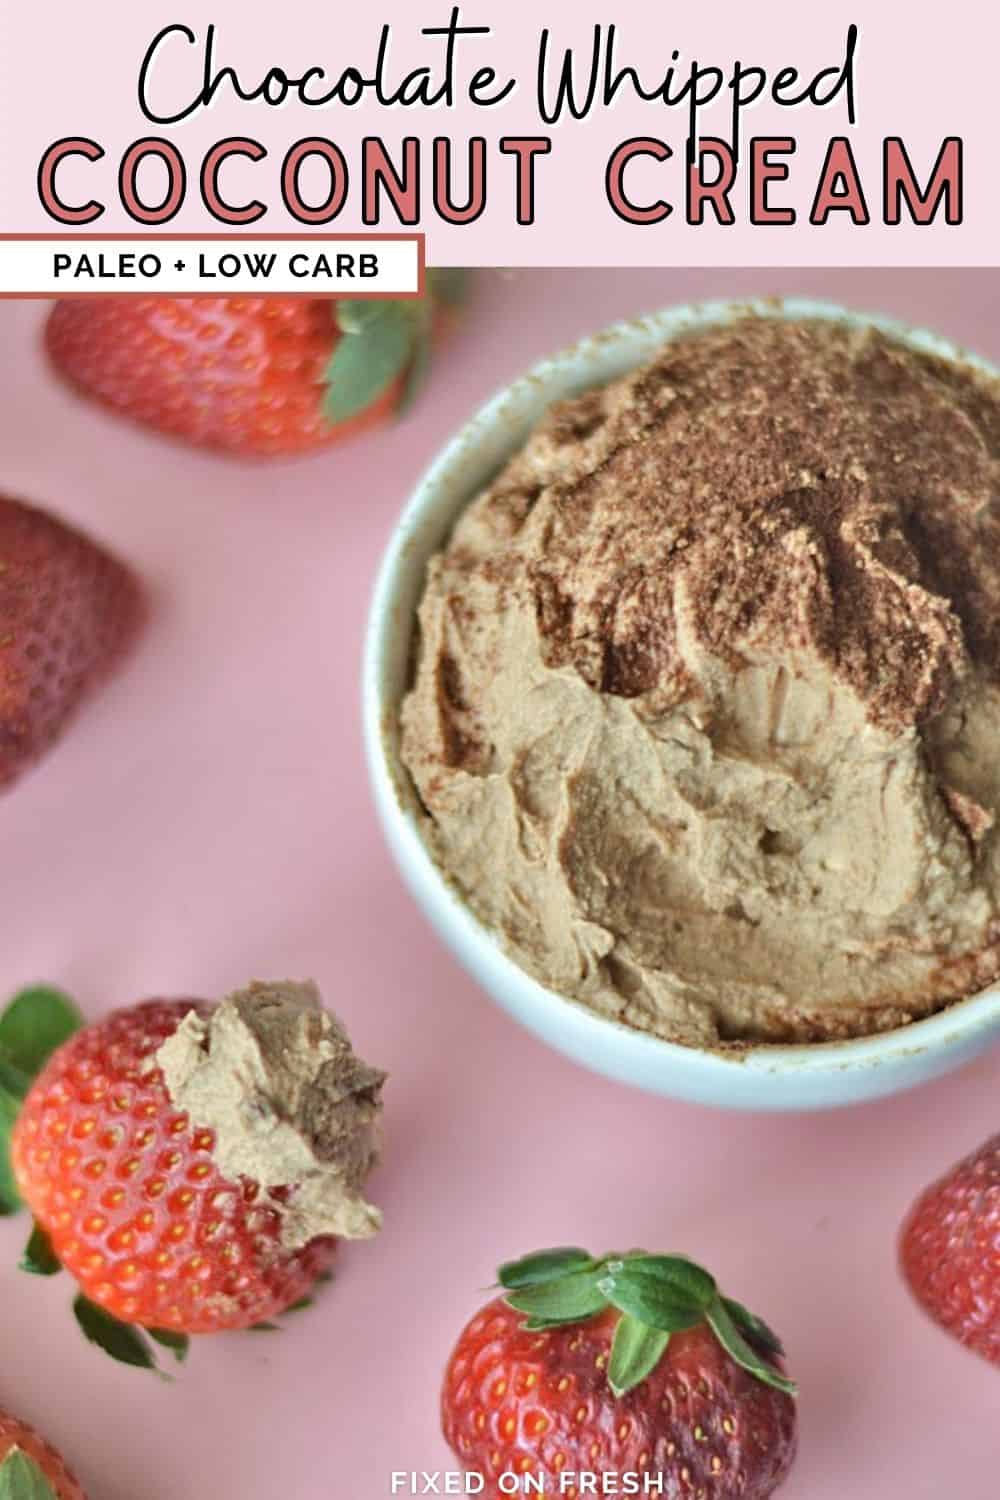 Better than chocolate mousse or chocolate whipped cream - its dairy free, sugar free chocolate whipped coconut cream. Paleo approved and low carb - perfect for a healthy Valentines Treat with strawberries!